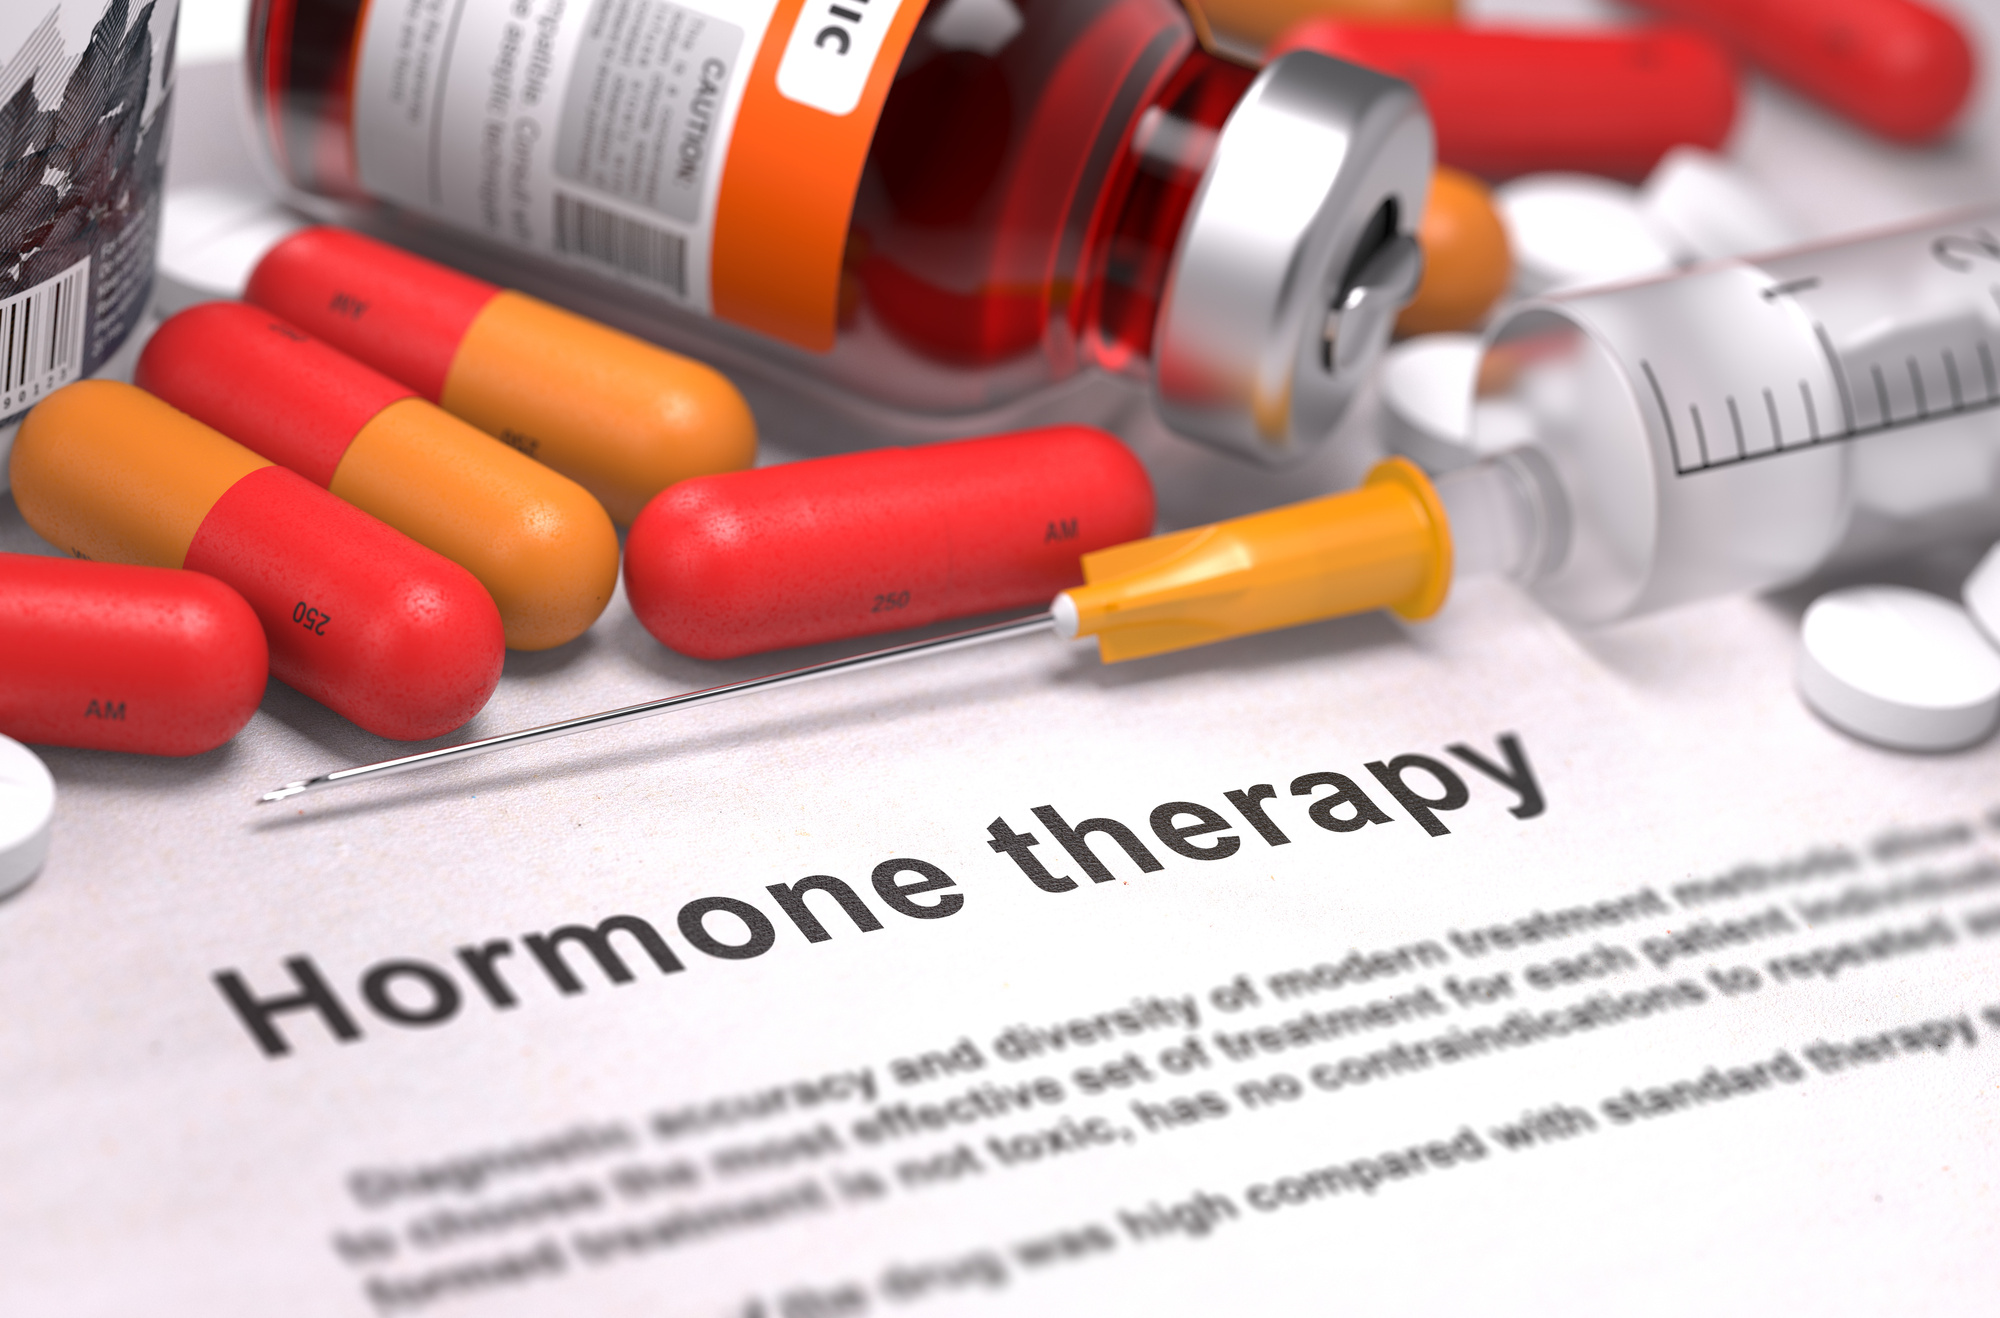 Hormone Replacement Therapy - Should Parents Be Allowed to Offer to Children?